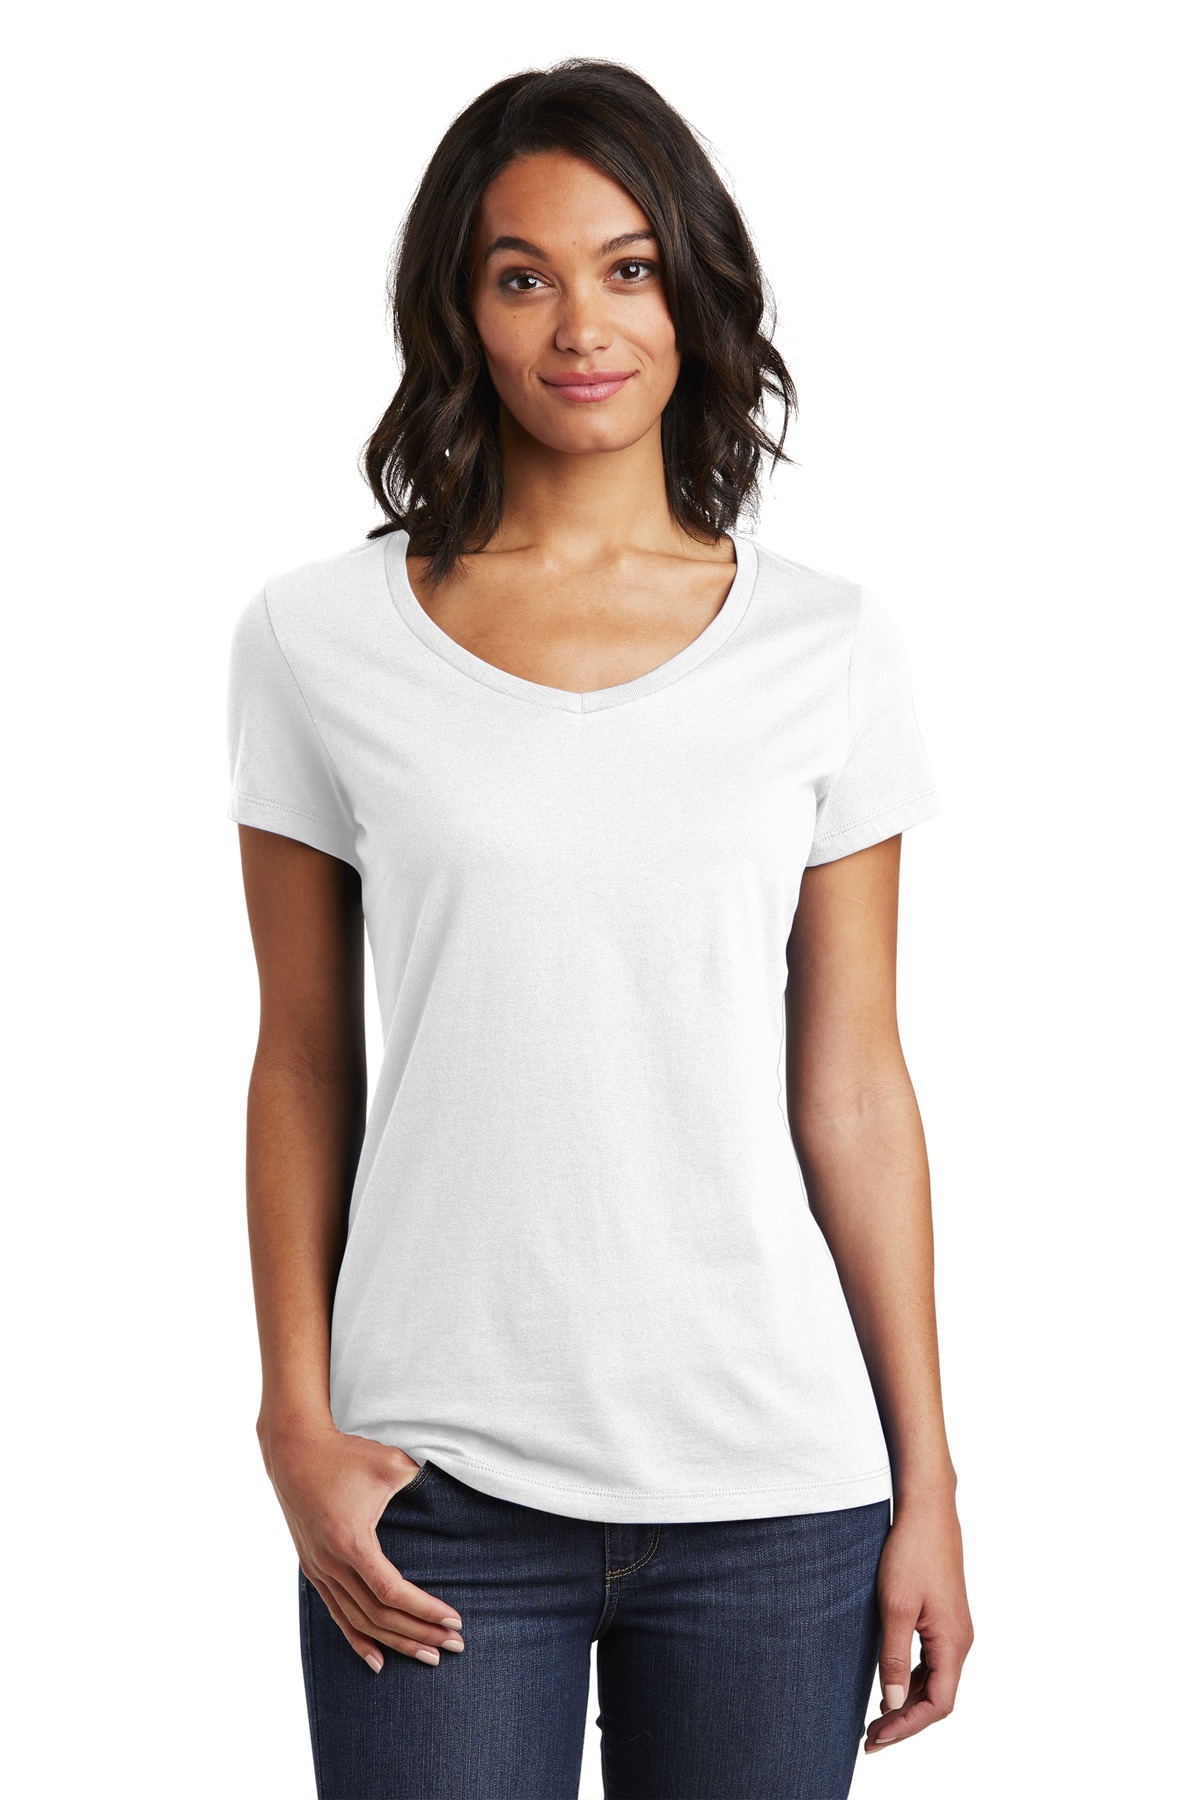 District Ladies Hospitality T-Shirts ® Womens Very Important Tee ® V-Neck.-District